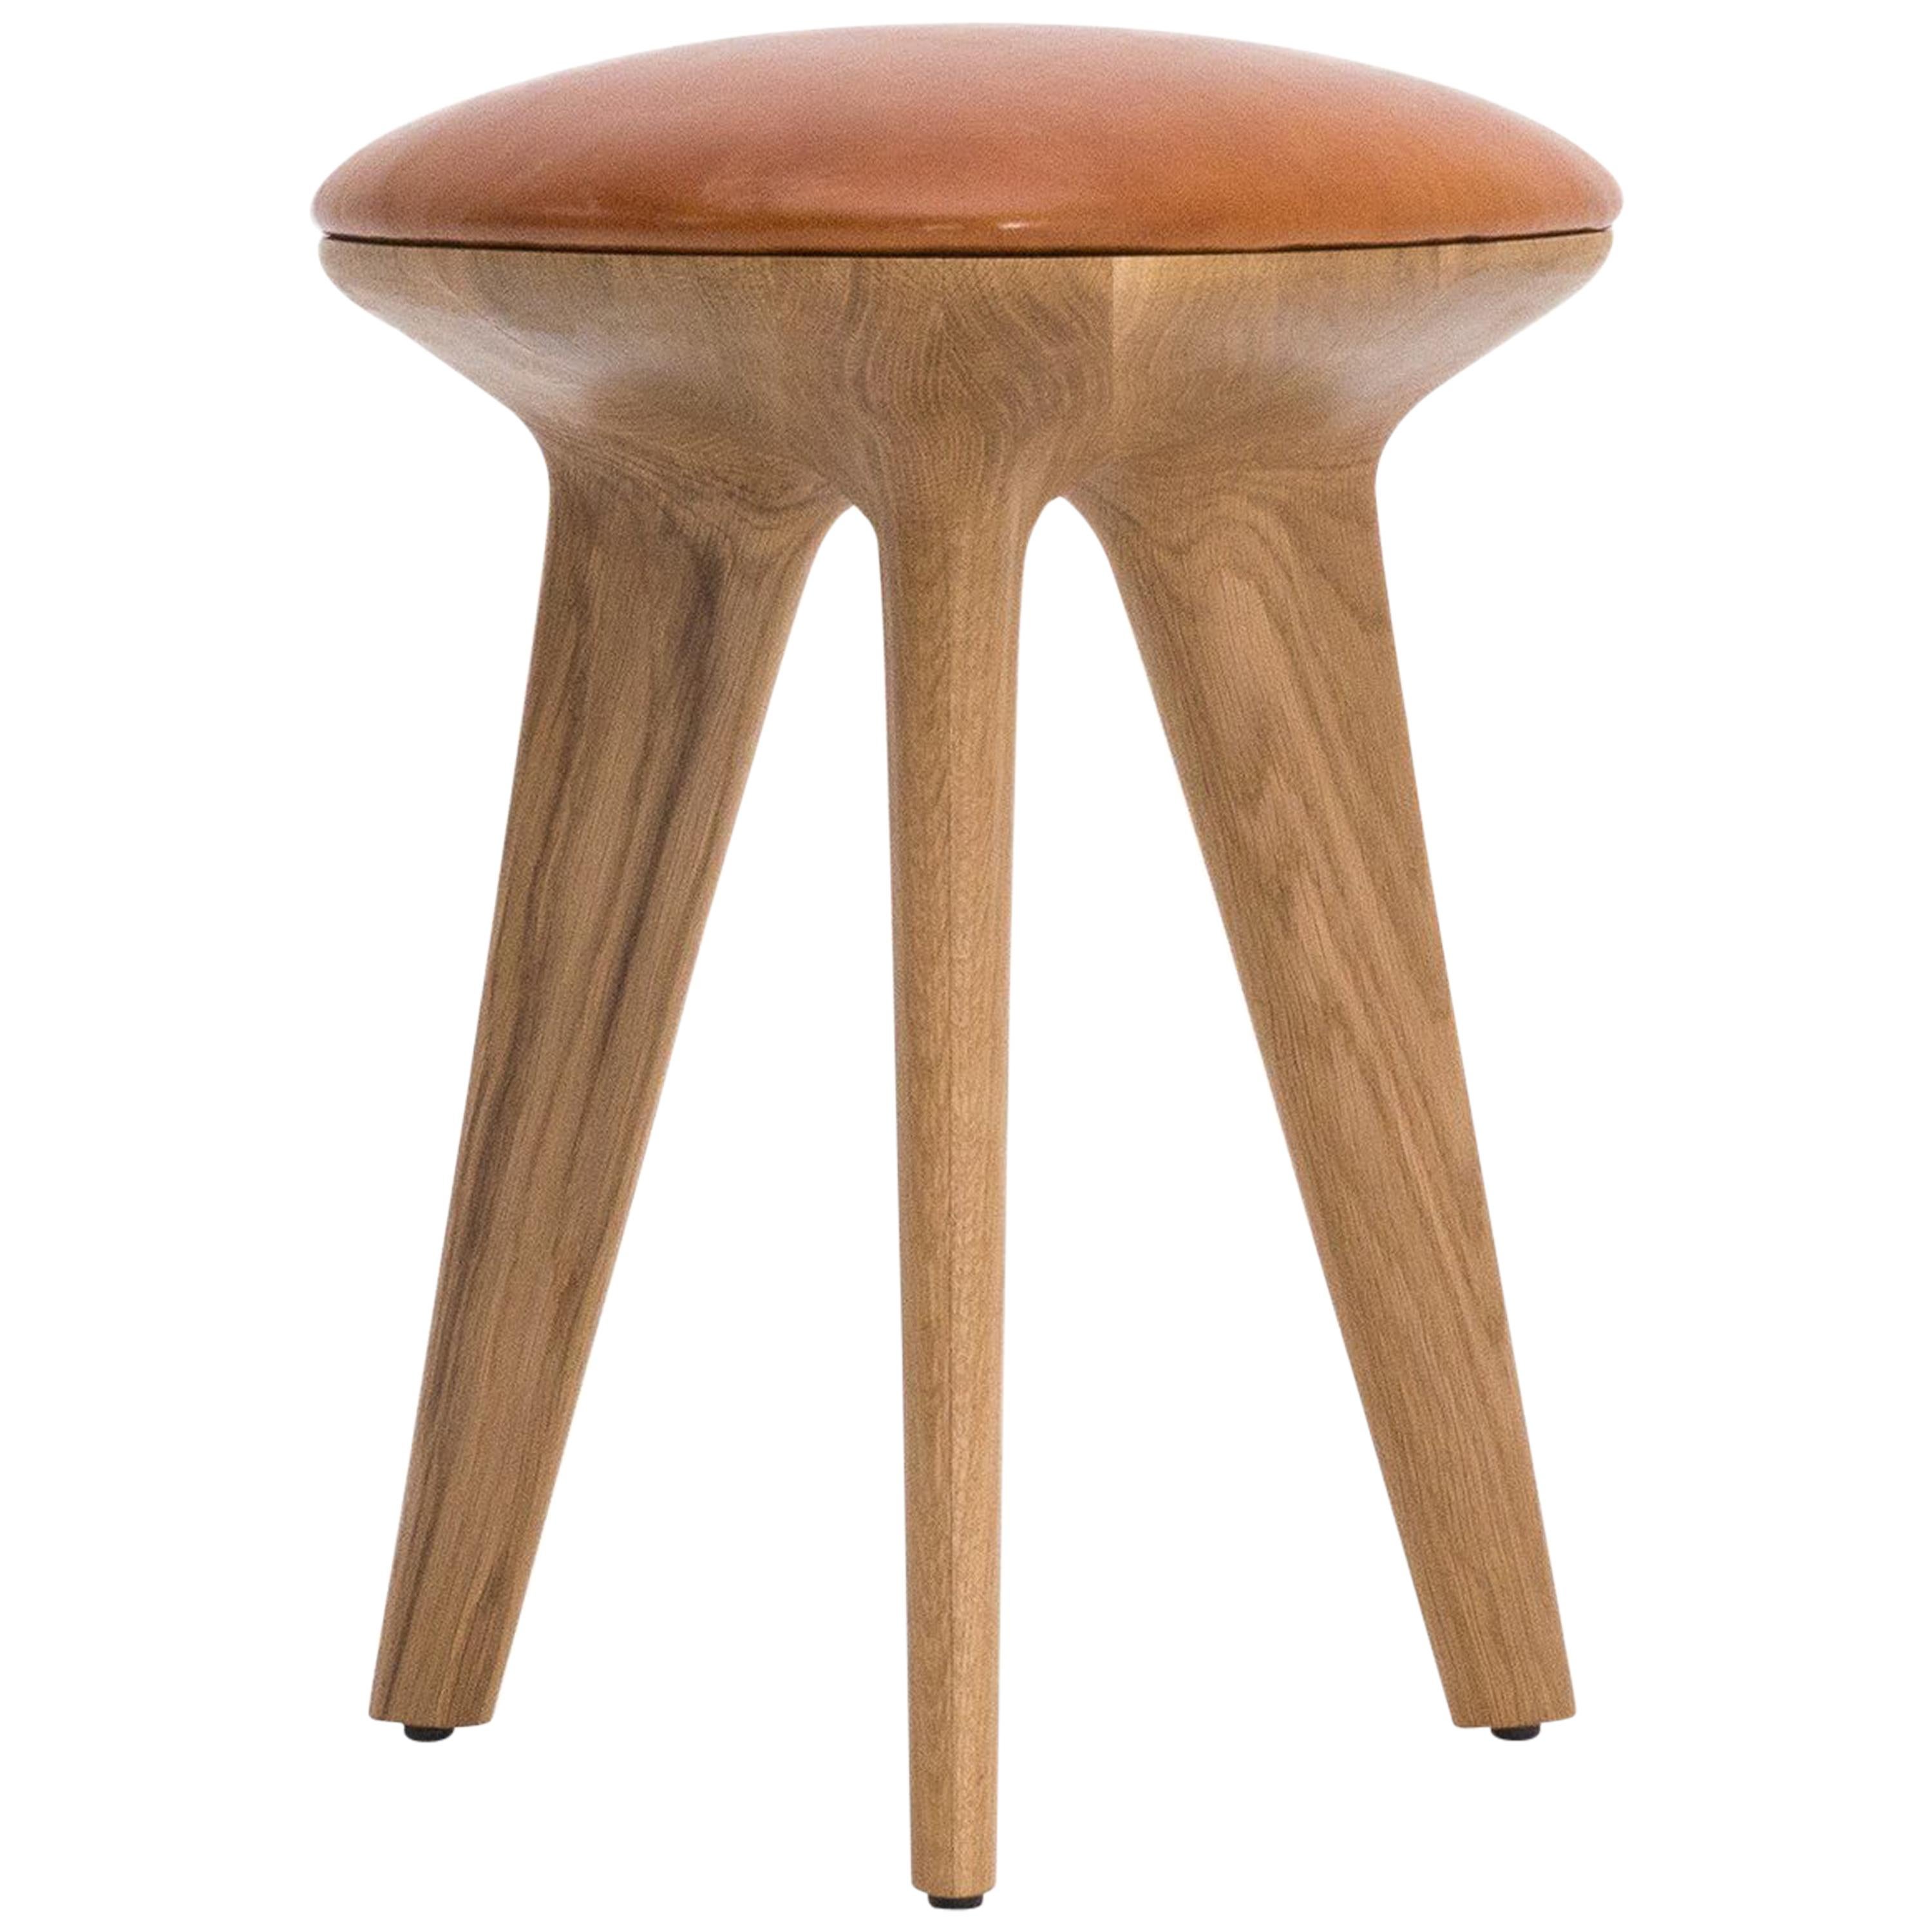 Minimalist Rotor, Solid Black Oak Stool with Black Padded Leather Seat by Made in Ratio For Sale